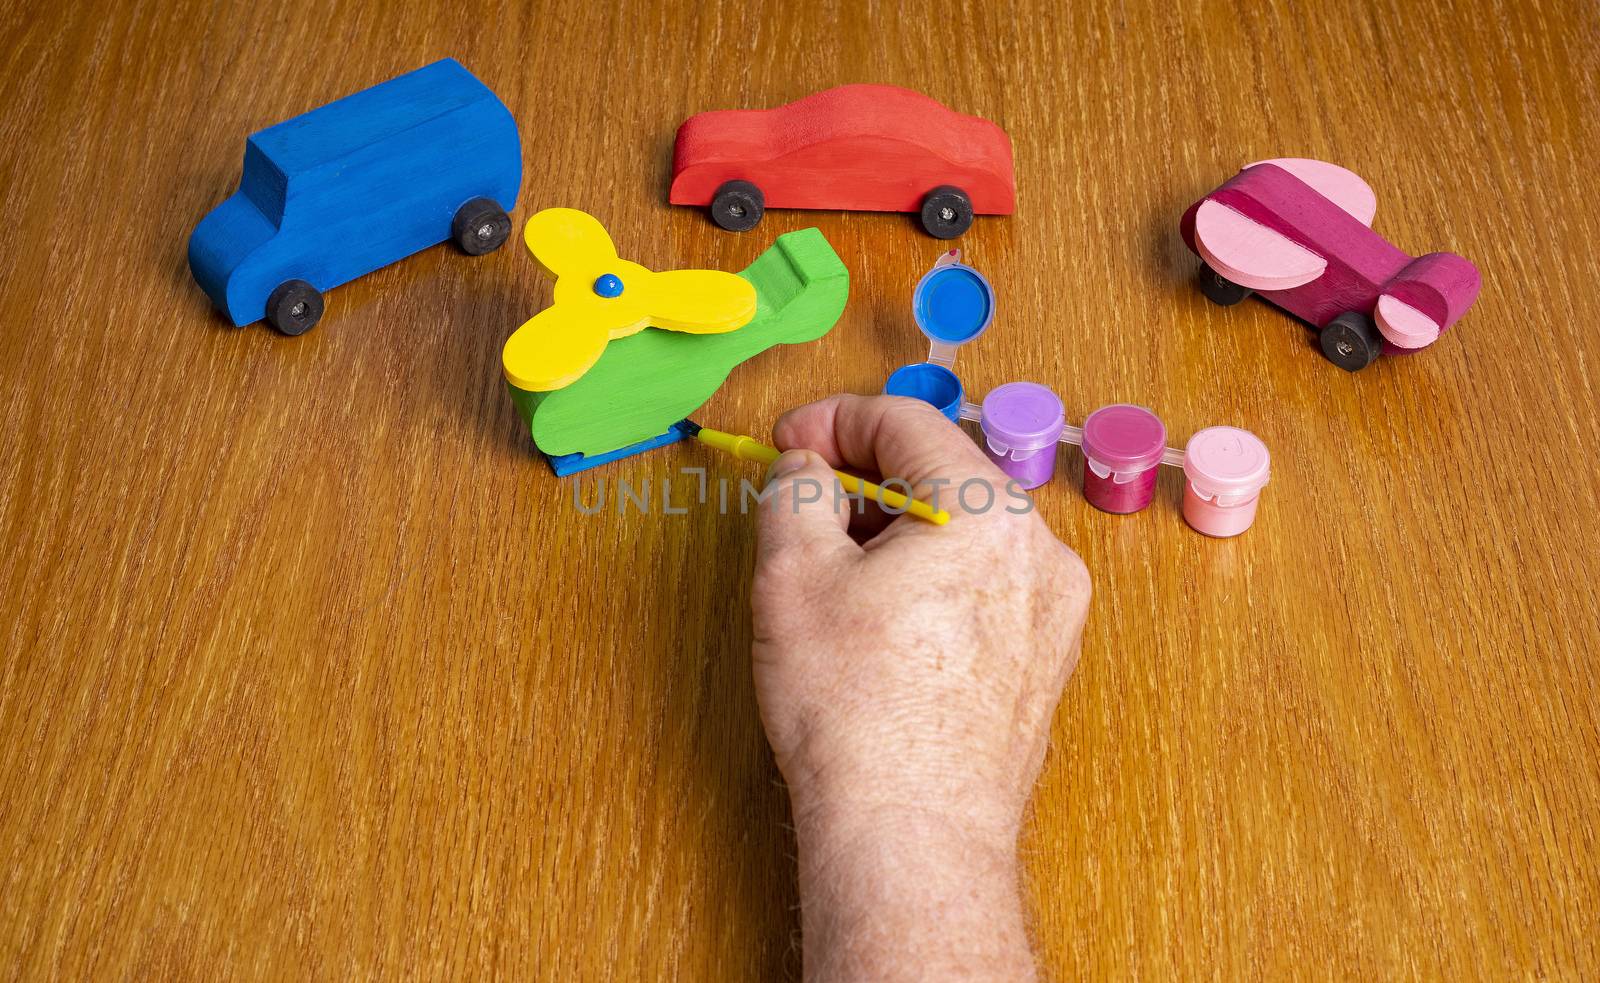 Painting the base of a wooden toy helicopter with other toy vehicles and paint in the scene.